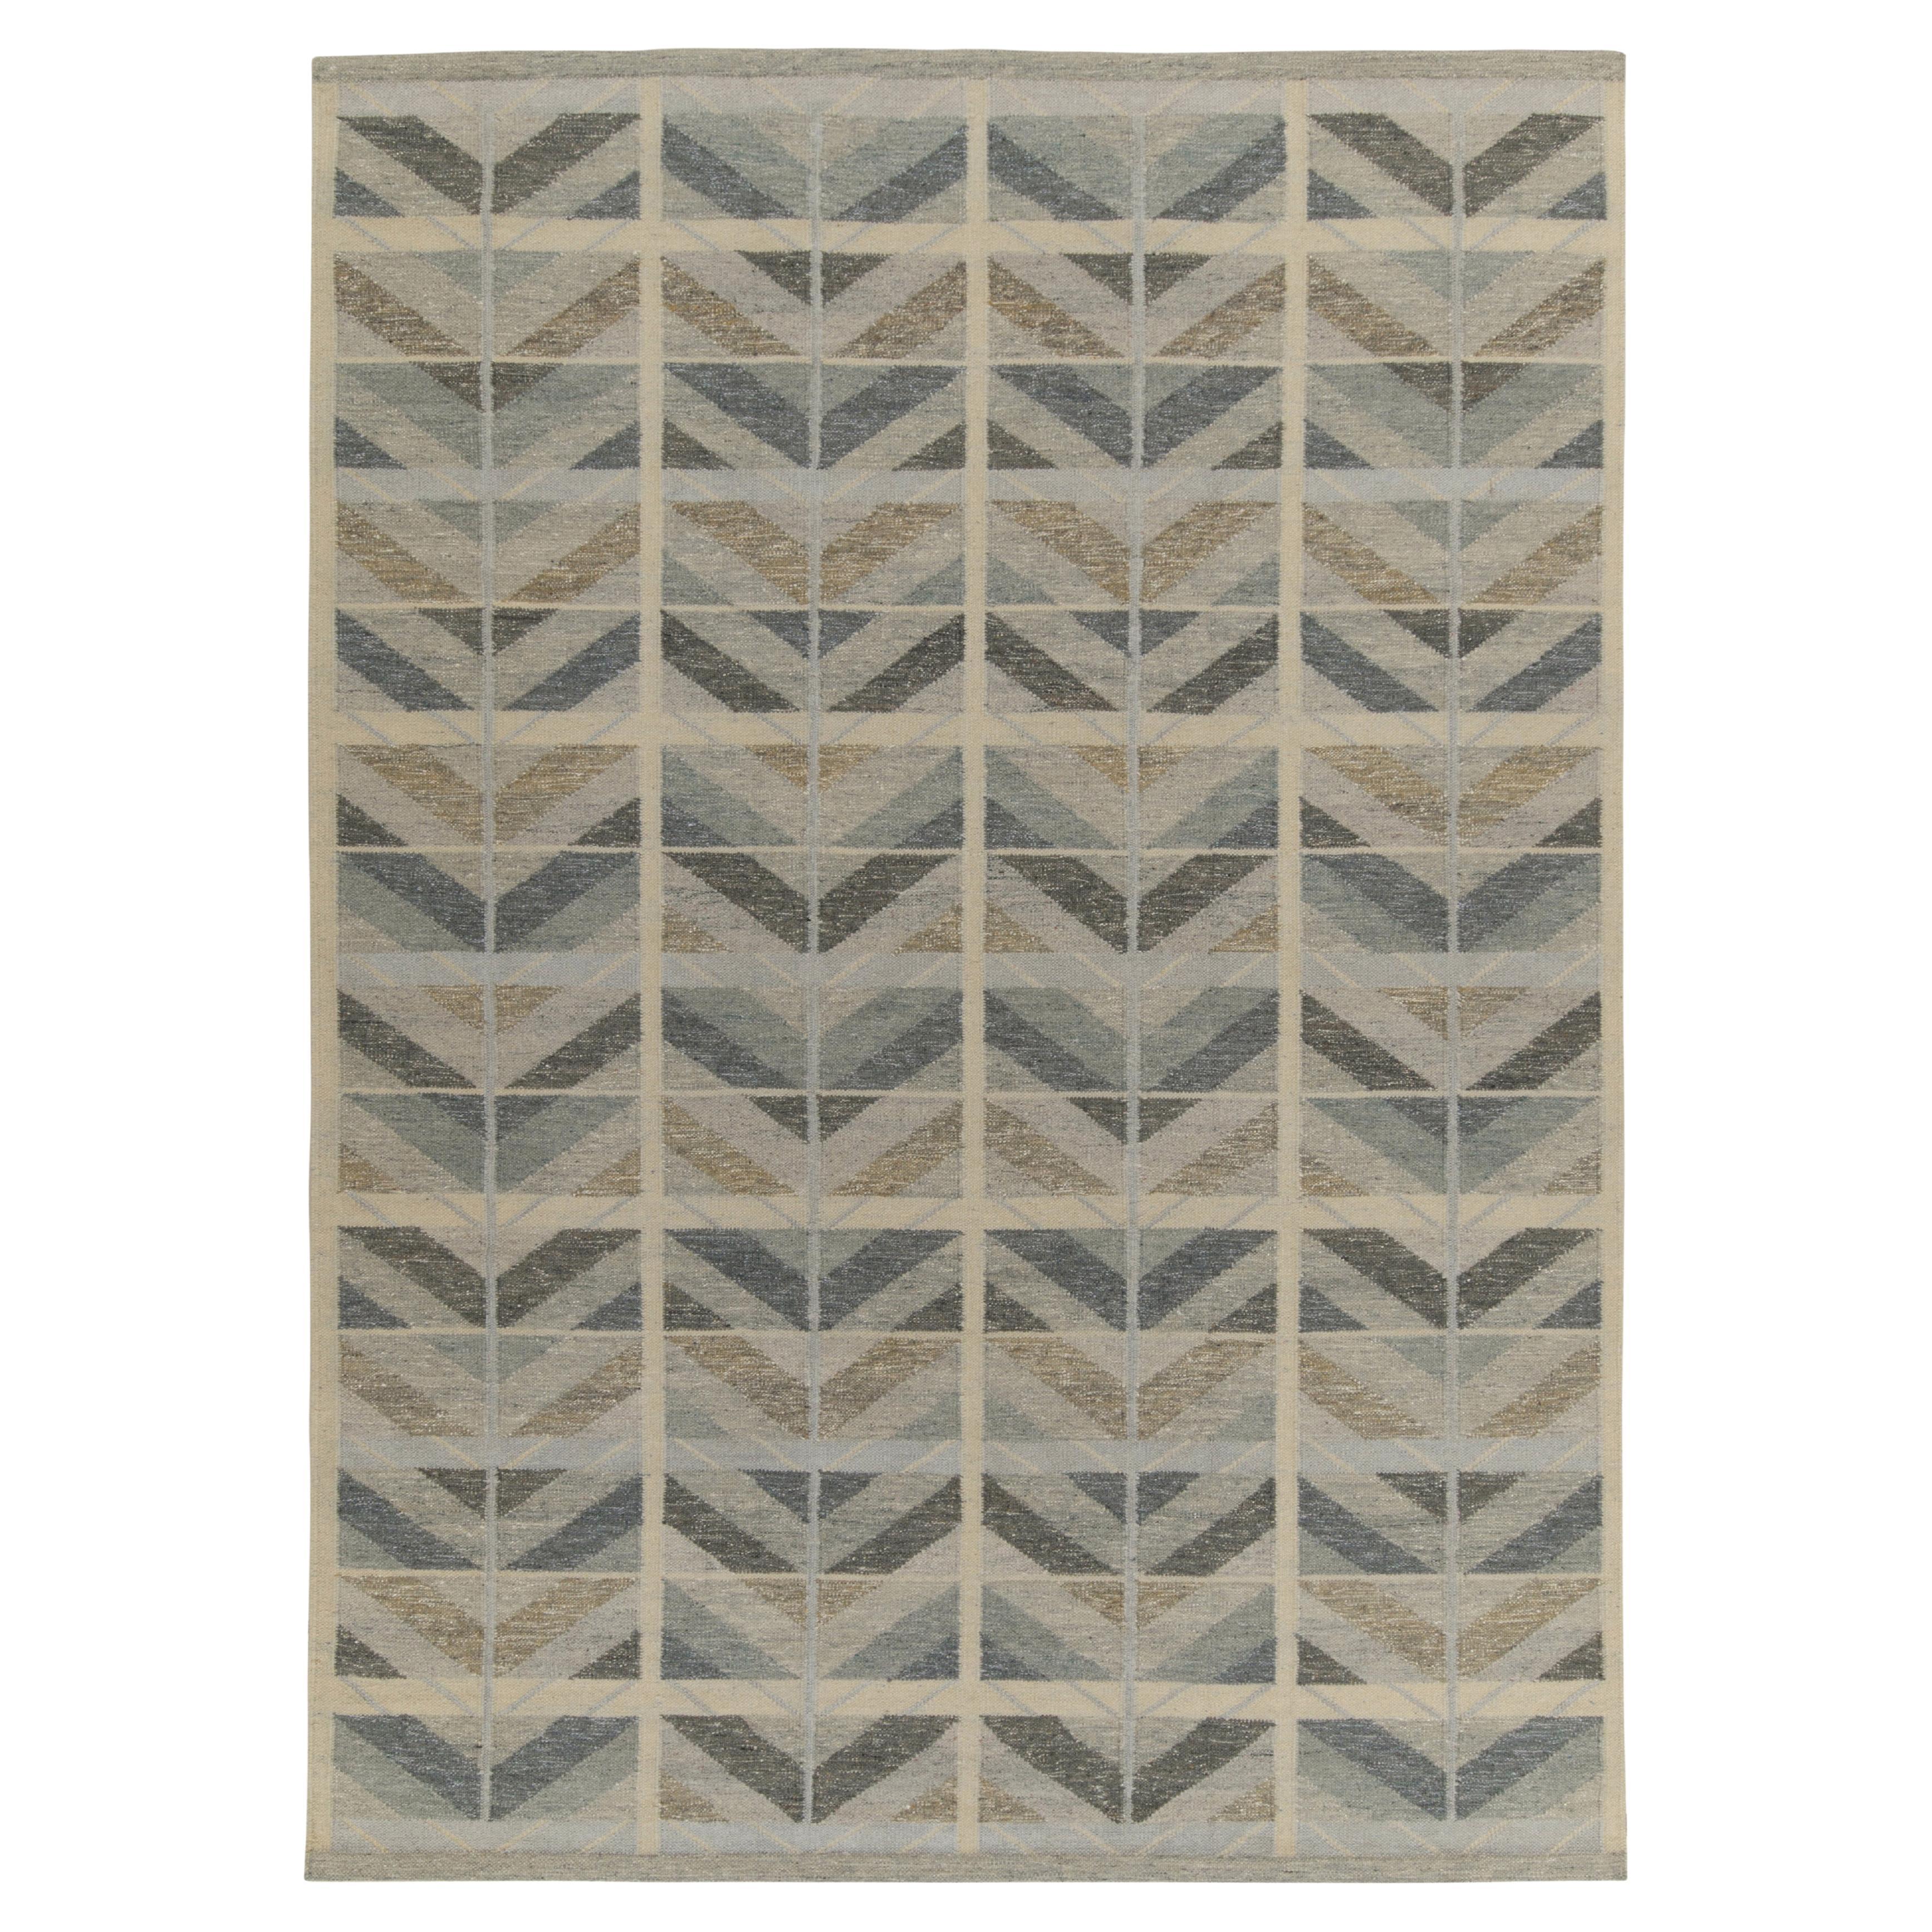 Rug & Kilim’s Scandinavian Style Kilim in Grey, Beige and Blue Chevron Patterns For Sale